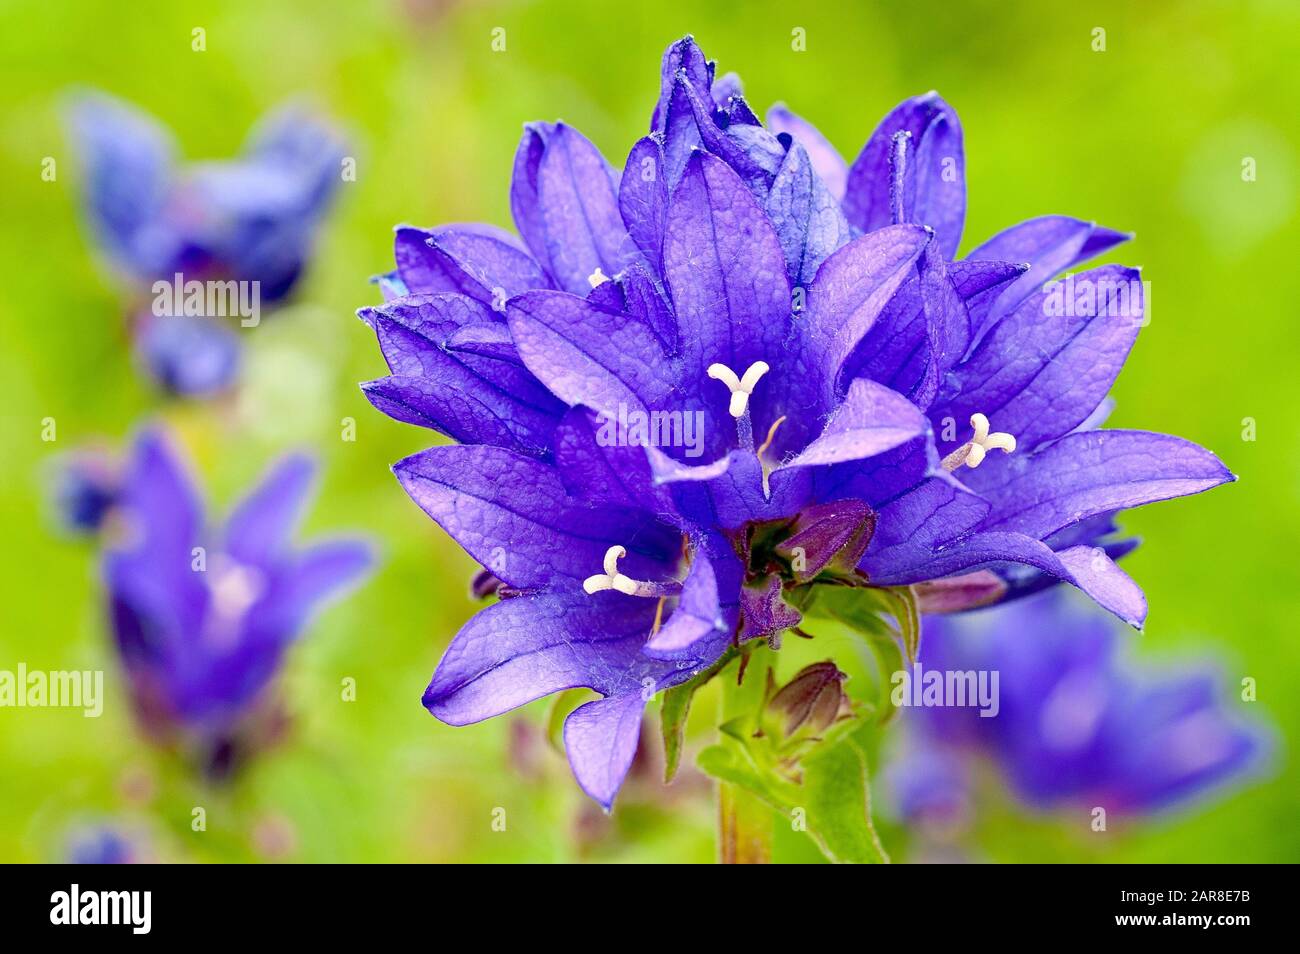 Clustered Bellflower (campanula glomerata), close up of a single flower head with others in the background. Stock Photo